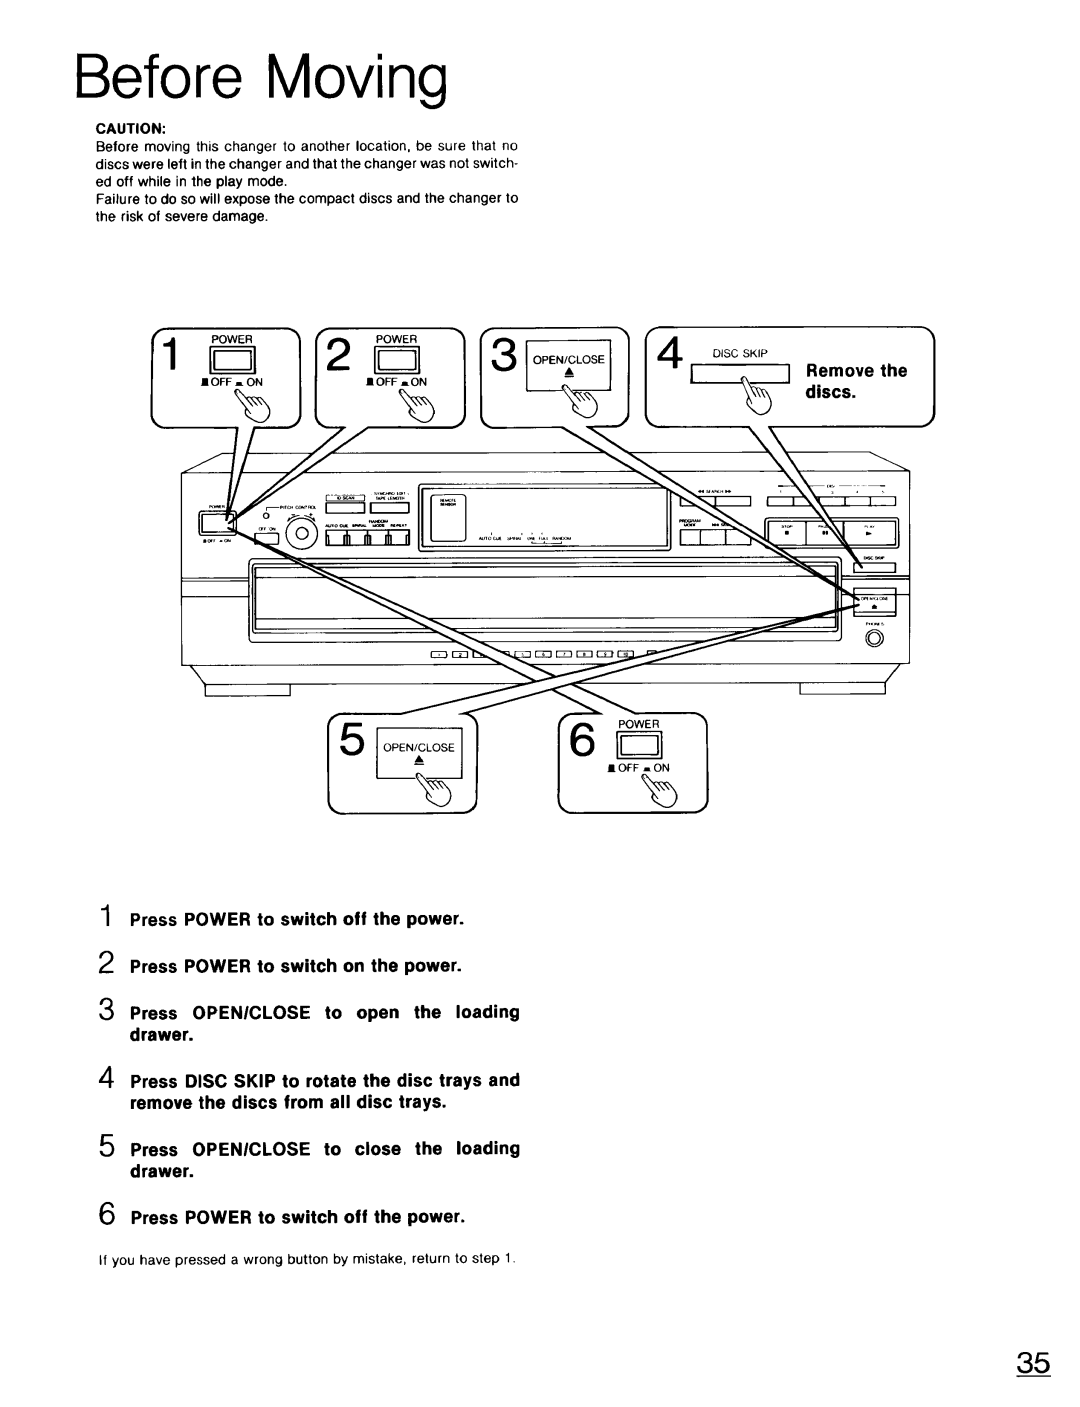 Technics SL-PD947 operating instructions Before Moving, Remove the, discs, Press POWER to switch off the power 